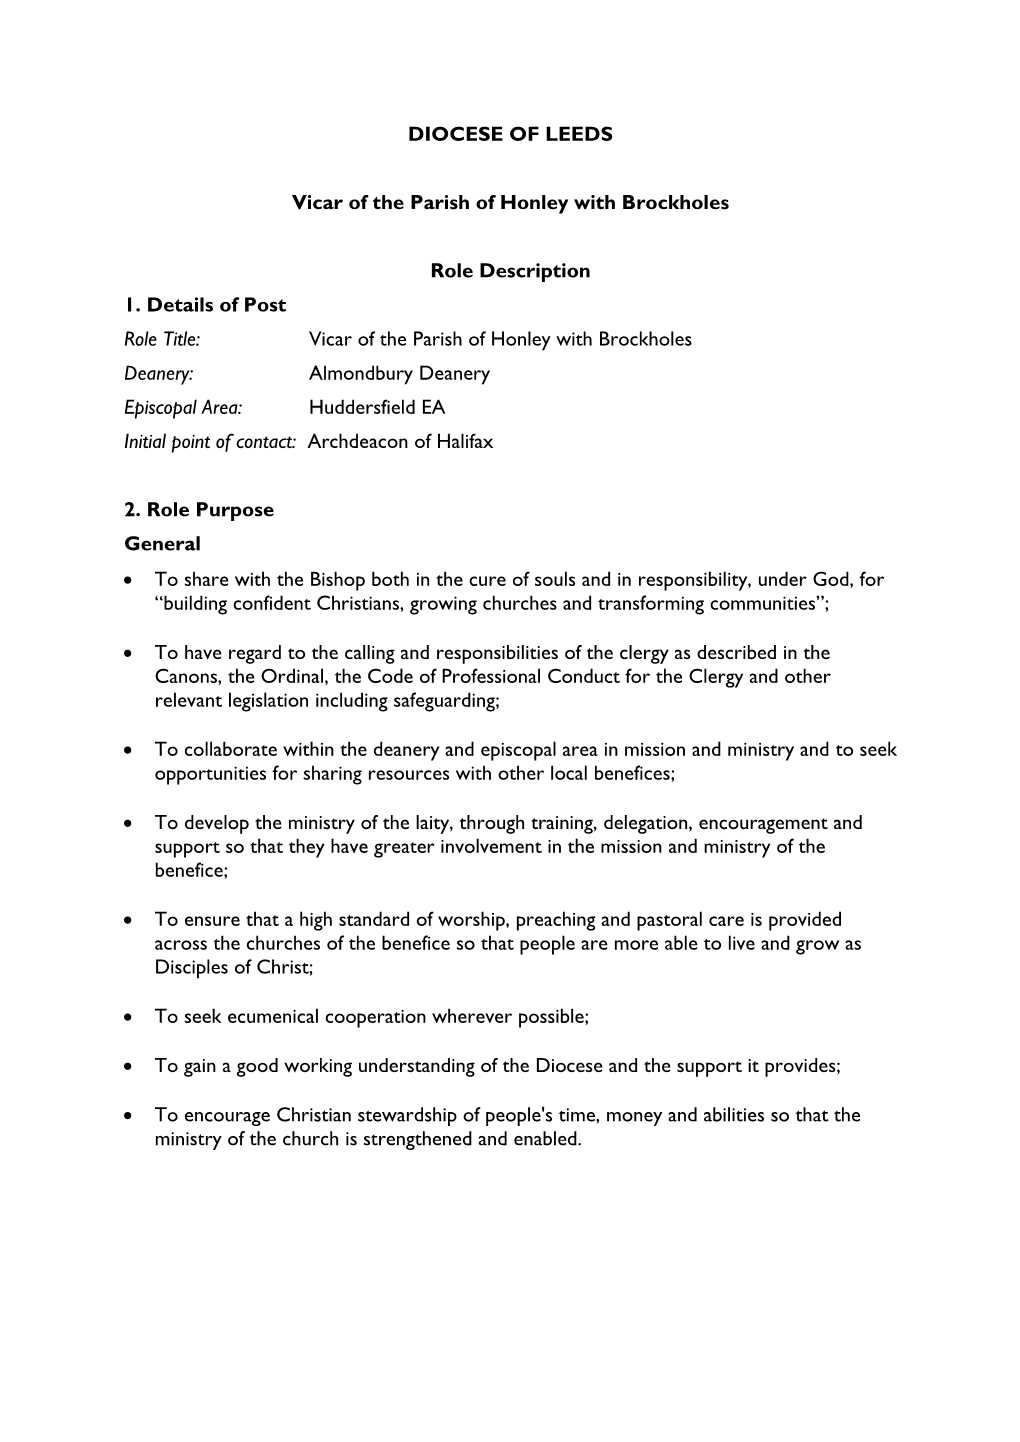 DIOCESE of LEEDS Vicar of the Parish of Honley with Brockholes Role Description 1. Details of Post Role Title: Vicar of The